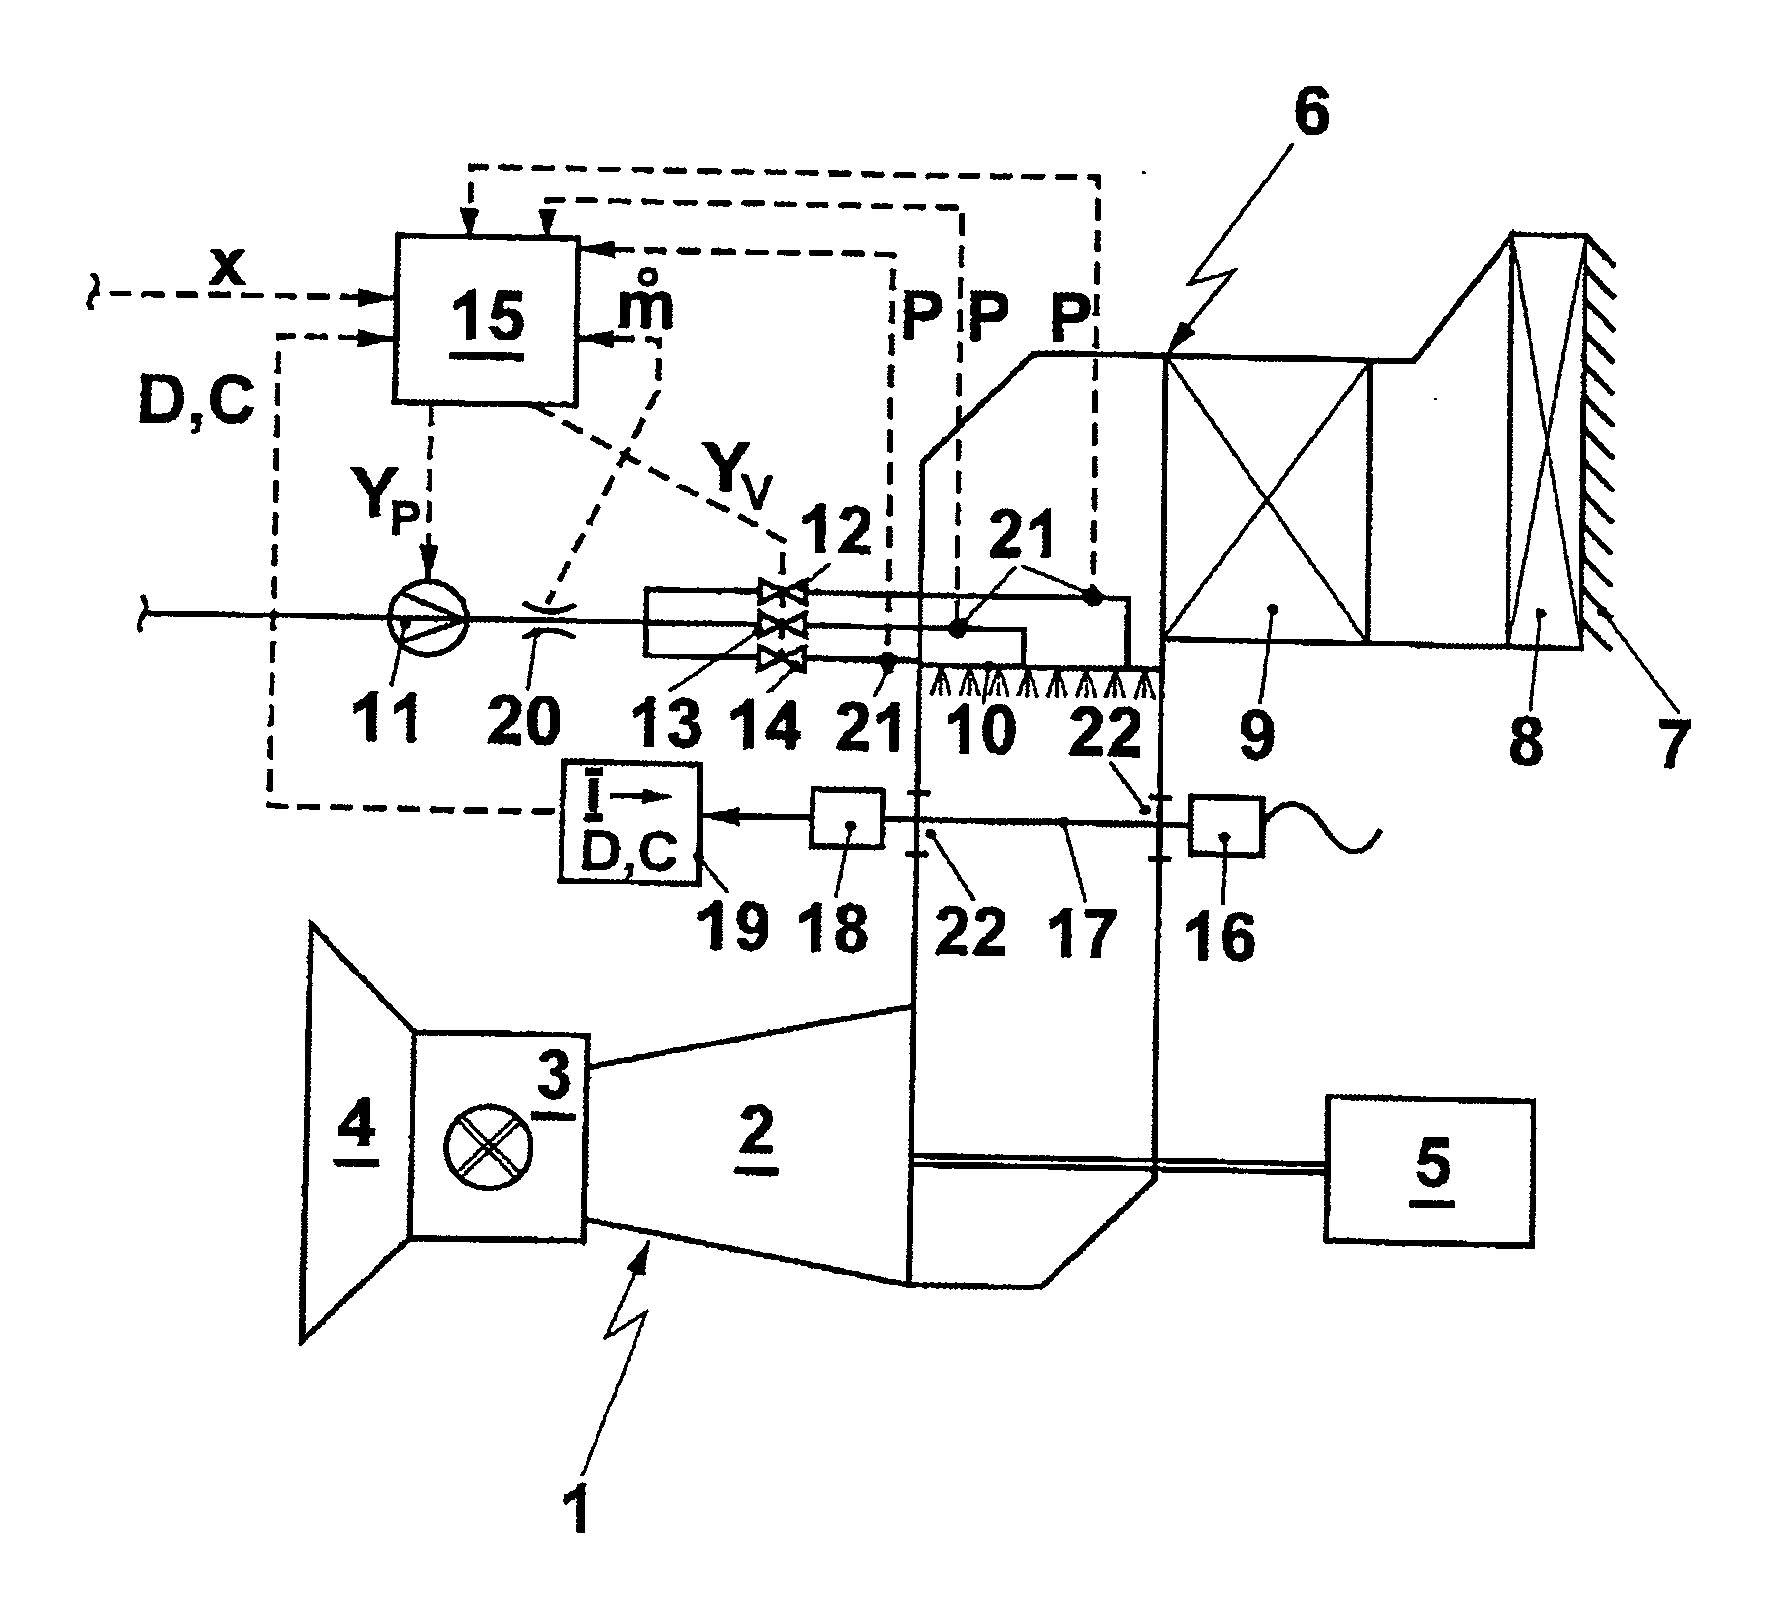 Method for operating an air-breathing engine